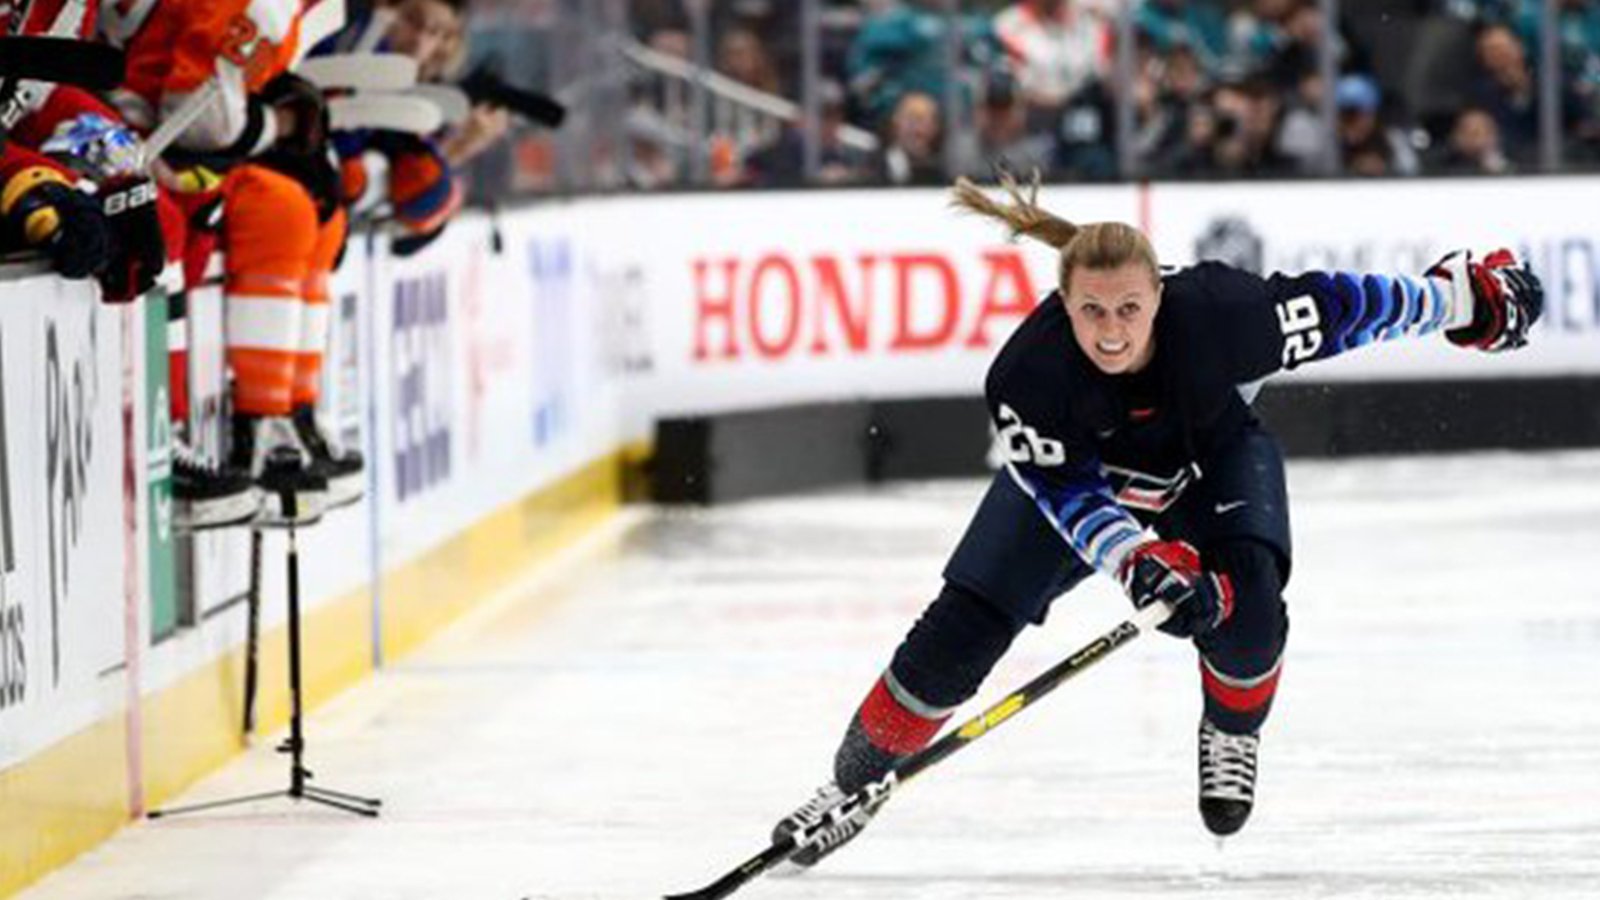 Kendall Coyne hired by NBC Sports after impressing at NHL All-Star weekend